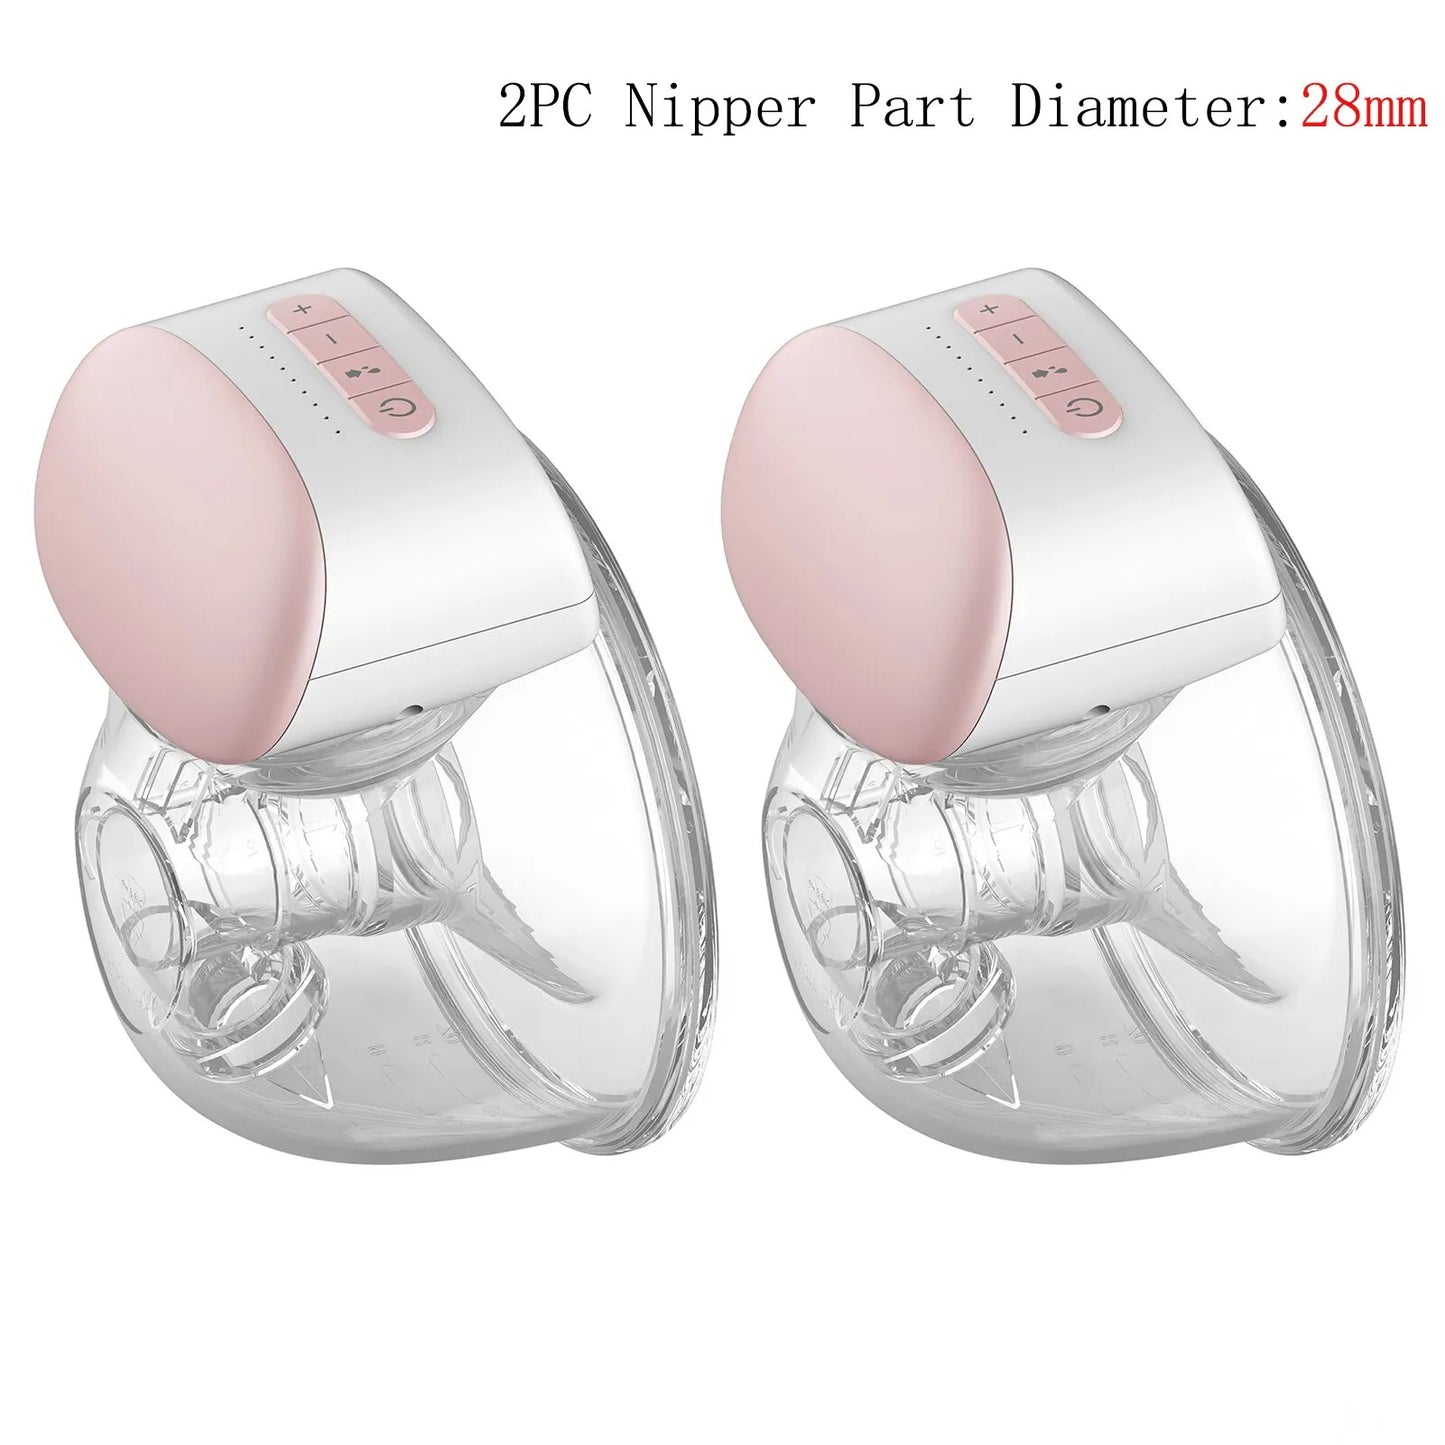 Portable Wearable Breast Pumps